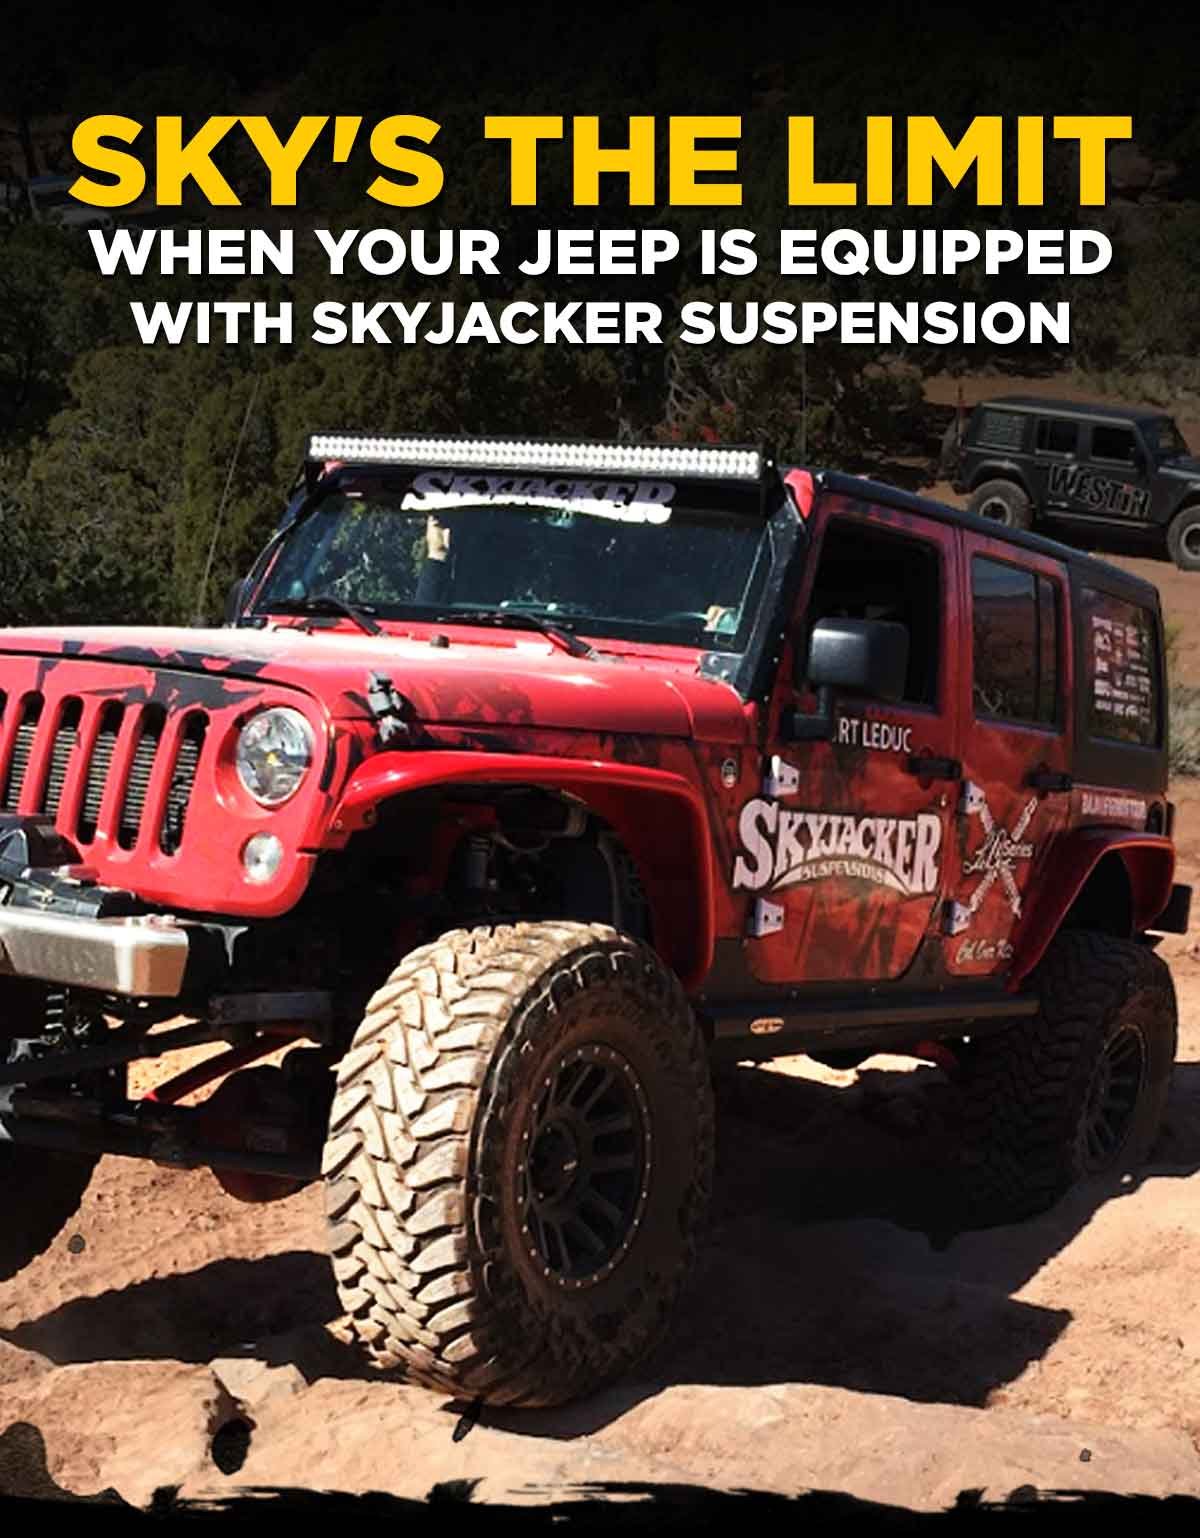 Sky's The Limit When Your Jeep Is Equipped With Skyjacker Suspension